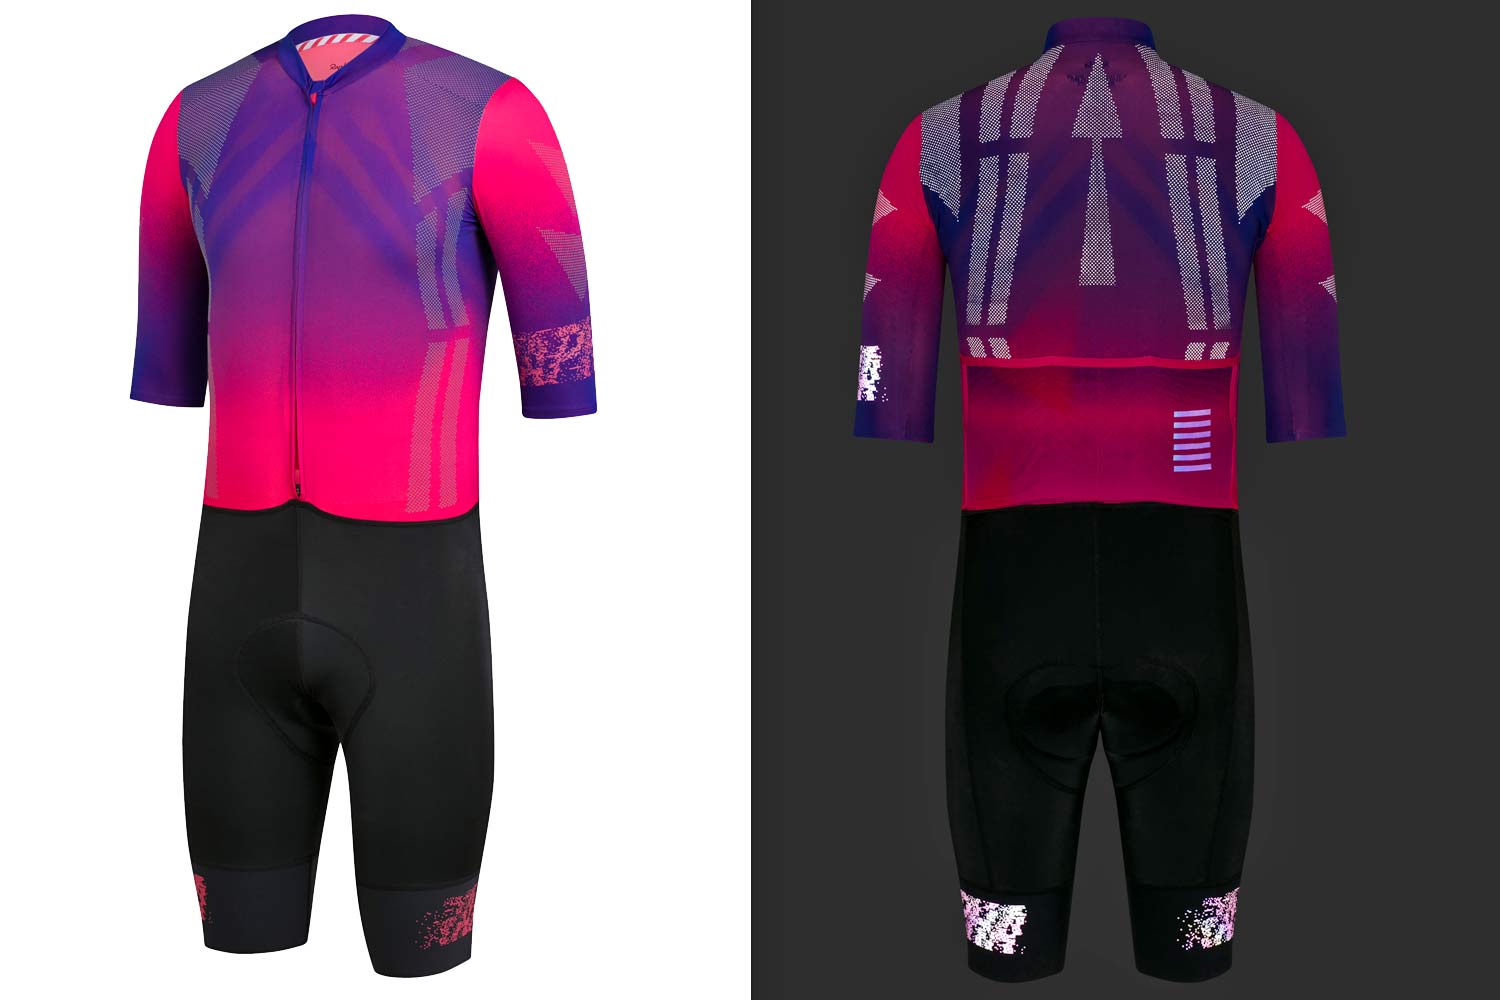 Rapha Pro Team Crit cycling kit, Crit Collection criterium racing cycling clothing